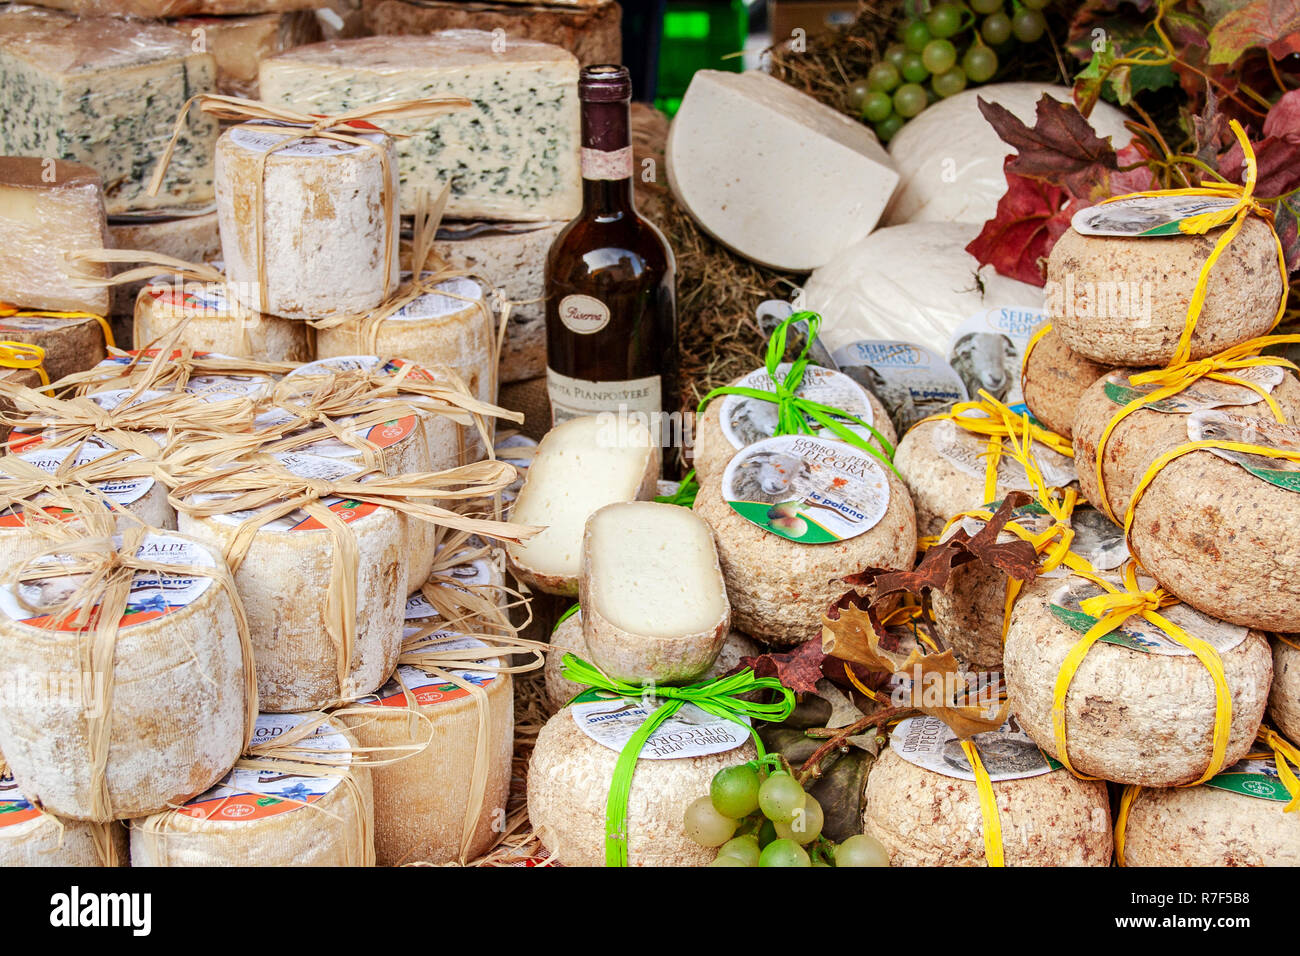 At ALBA - ON 04/15/2017- Cheese and wine, Typical products of Piedmonte, Italy Stock Photo